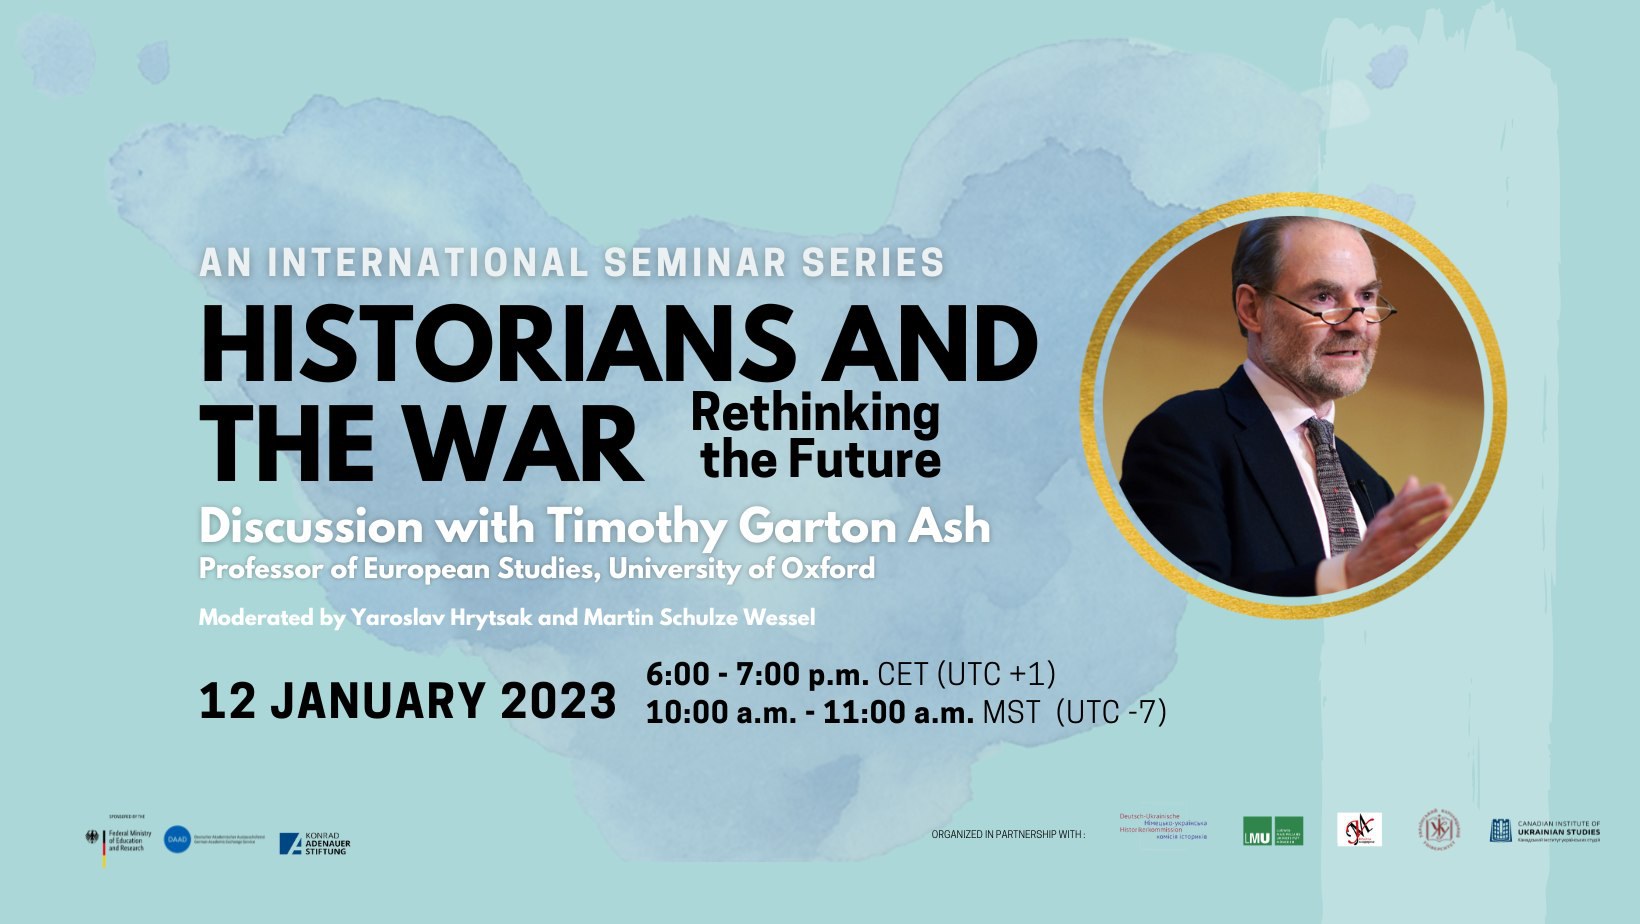 Online-Seminar der DUHK: "Historians and the War: Discussion with Prof. Timothy Garton Ash"